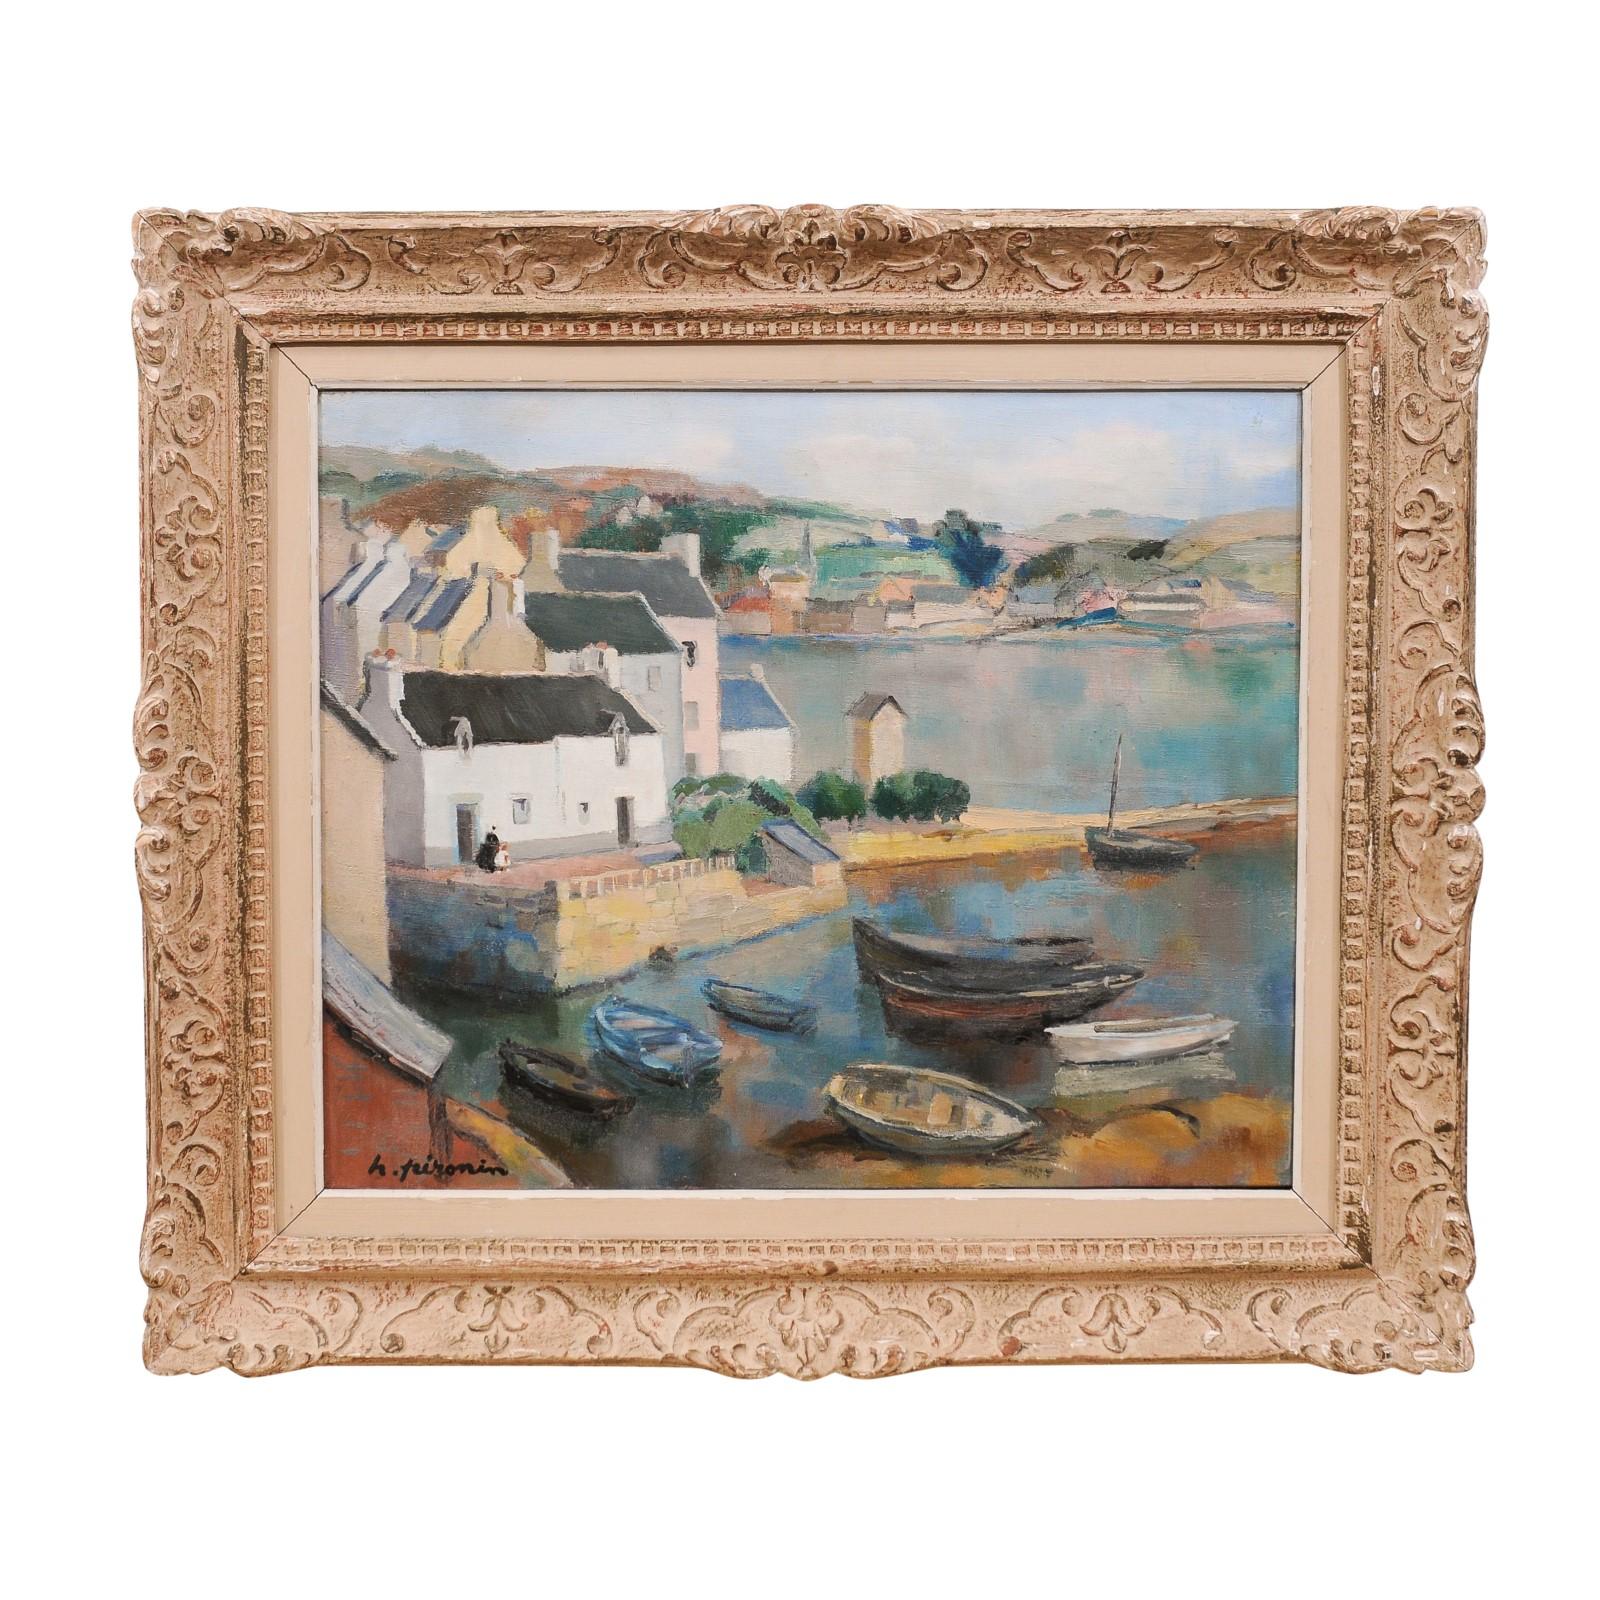 A French framed harbor painting by Hortense Pironin from the mid 20th century, titled 'Le petit port à Poul'David'. Created in France during the third quarter of the 20th century, this horizontal painting depicts the small harbor of Pouldavid in